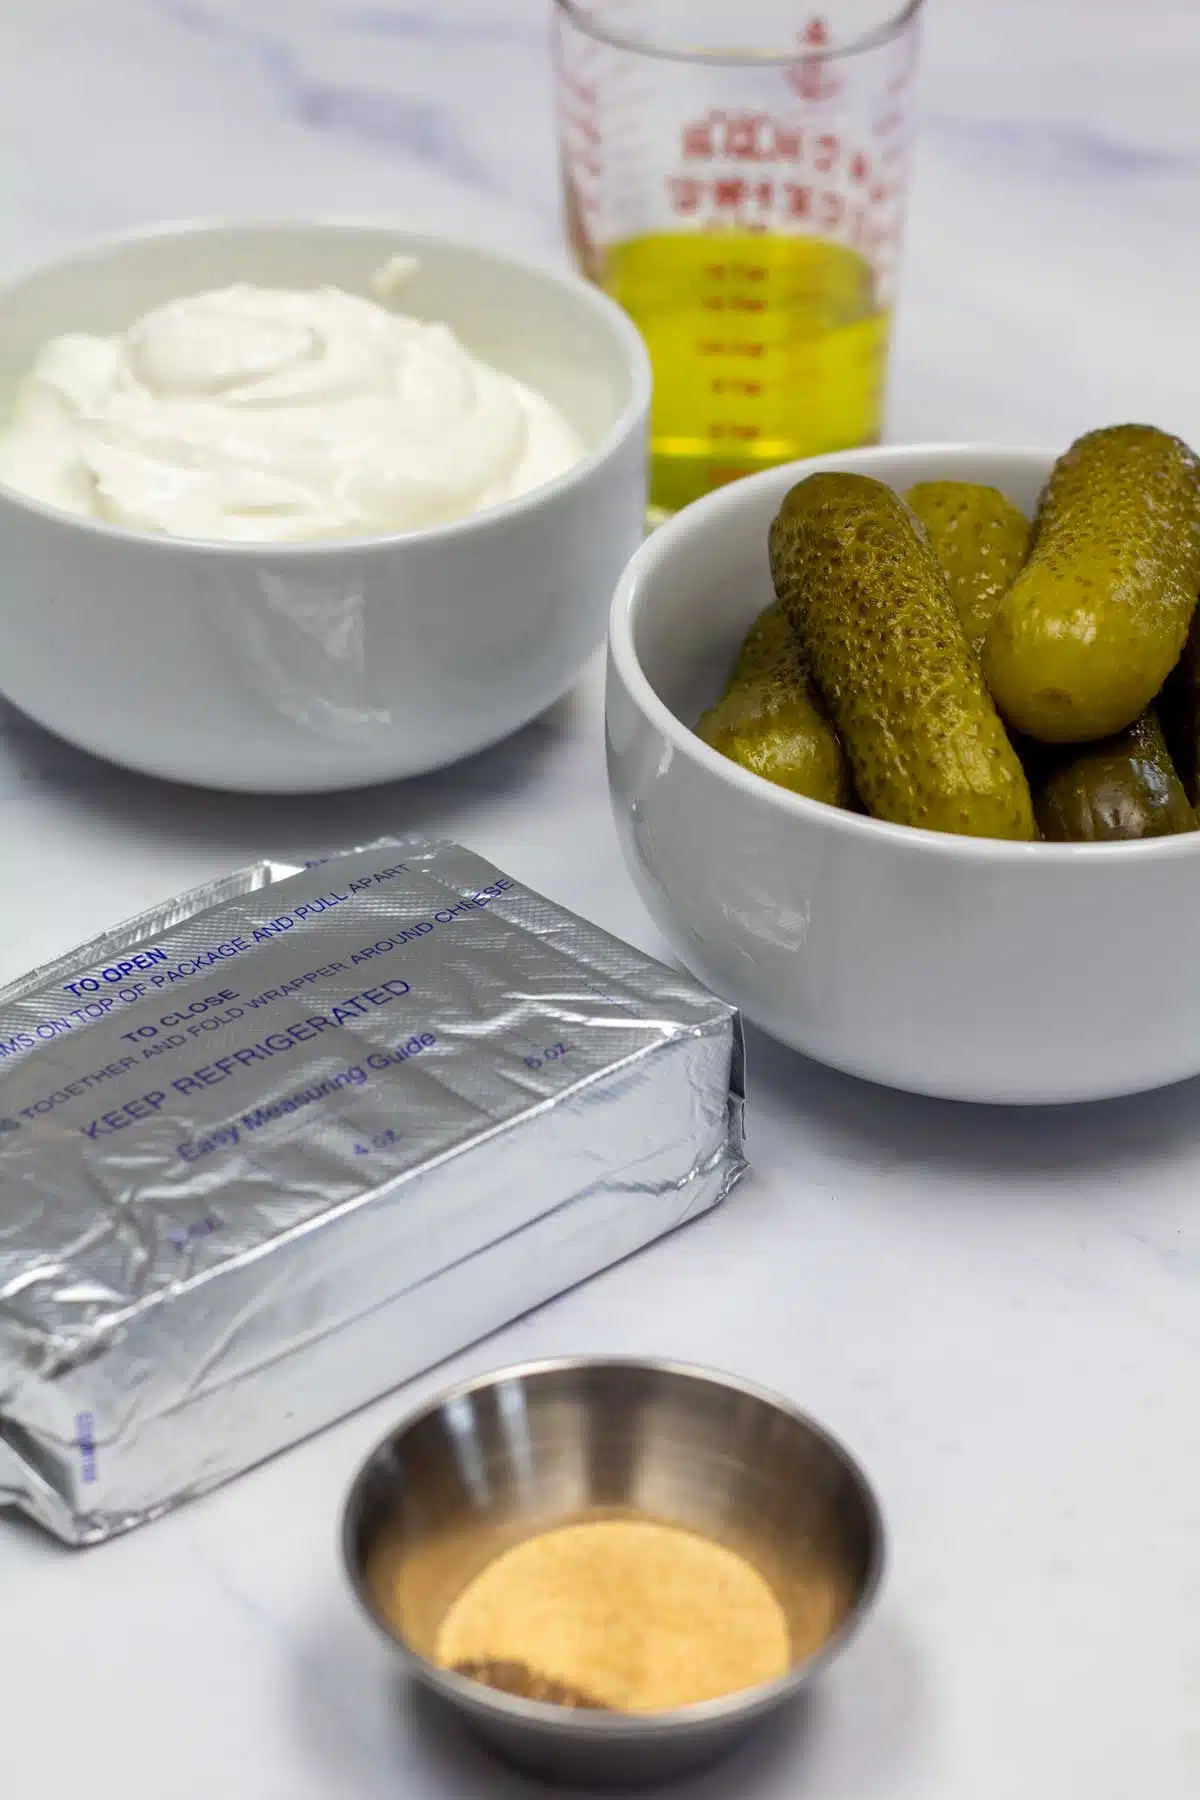 Tall image showing ingredients needed for dill pickle dip.